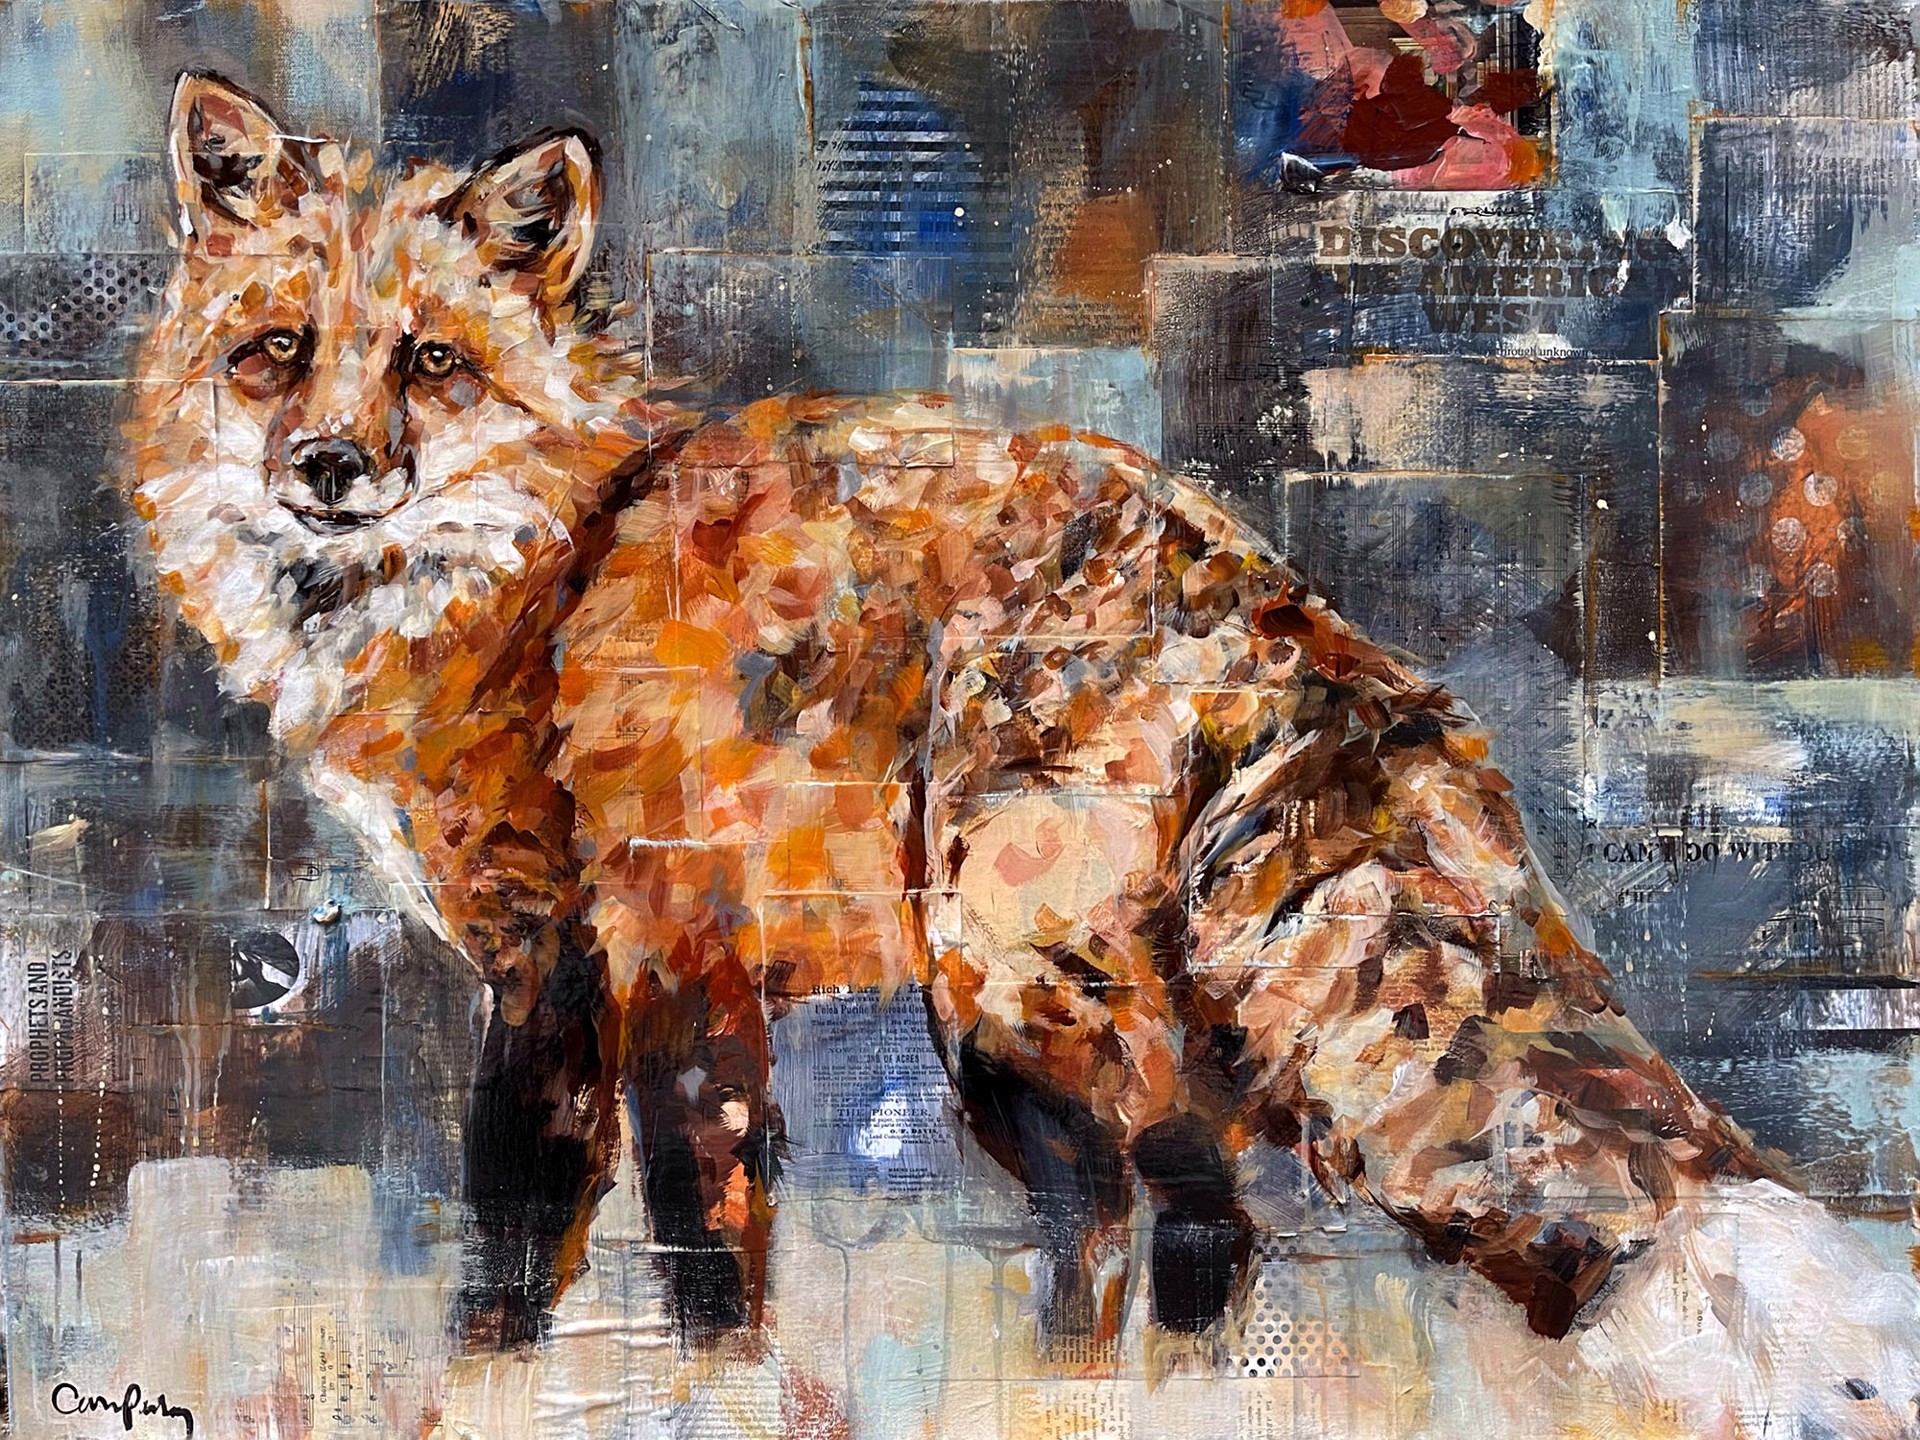 Original Mixed Media Painting By Carrie Penley Featuring A Fox On Collage Background